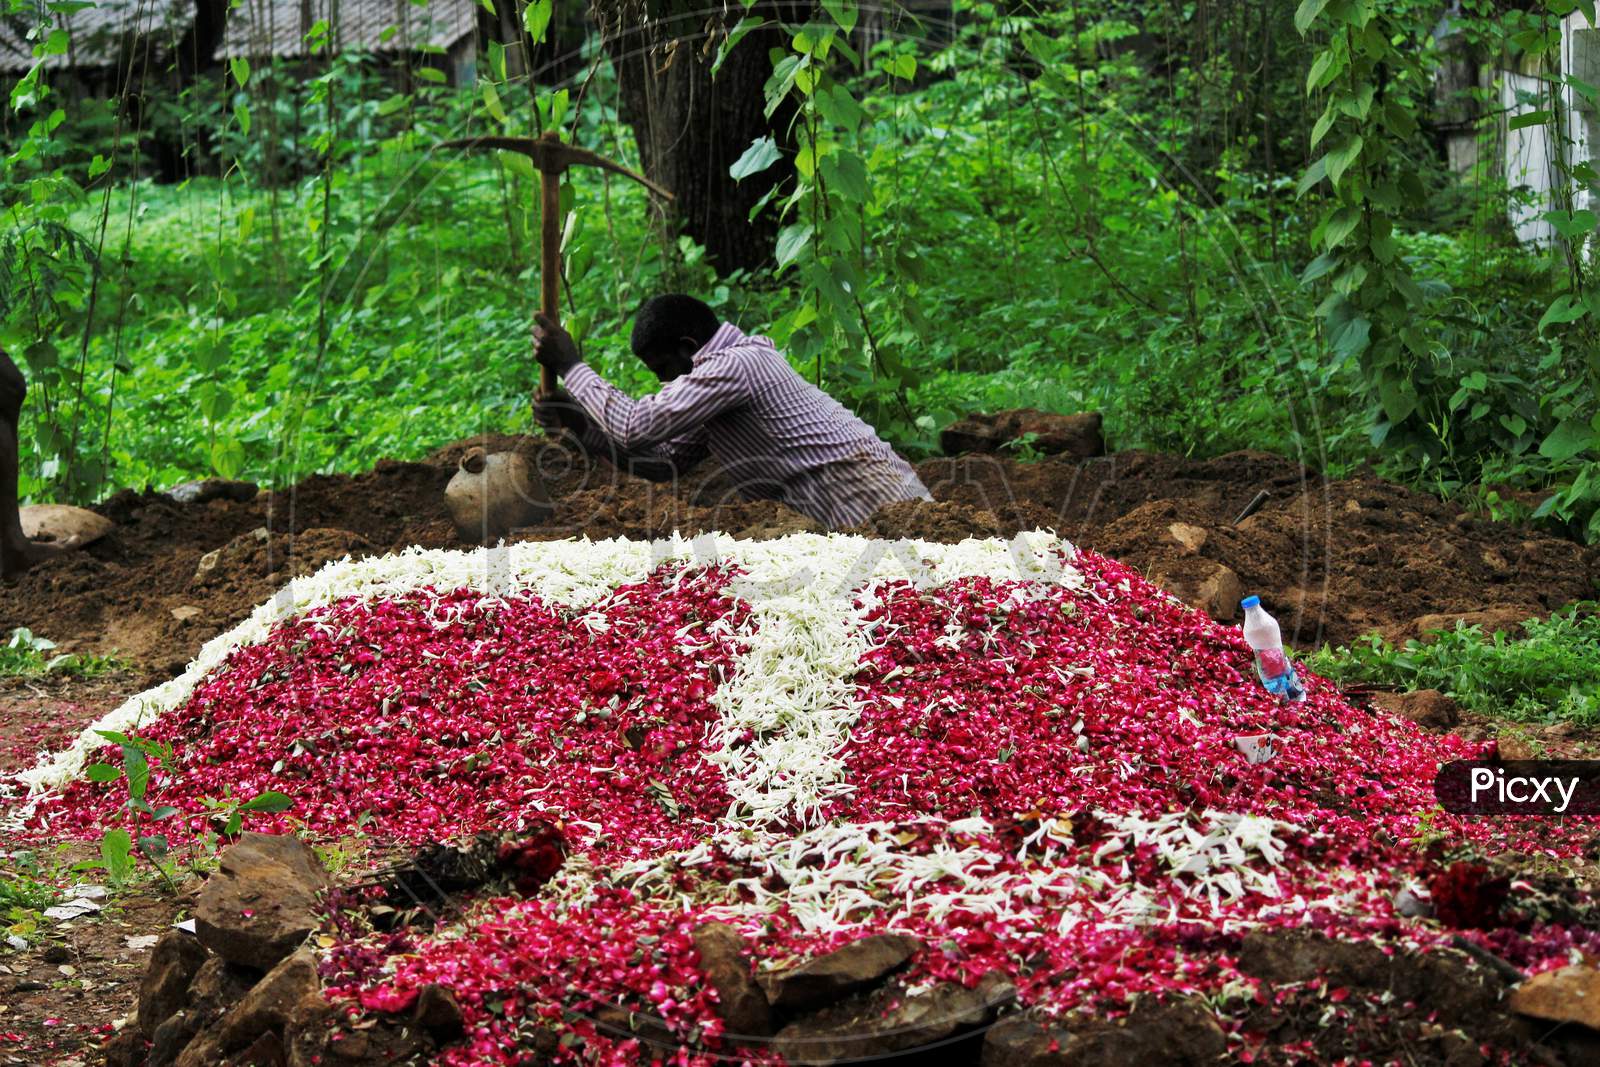 A gravedigger digs a grave for the burial of a person who died from the coronavirus disease (COVID-19) at a cemetery in Mumbai, India June 27, 2020.